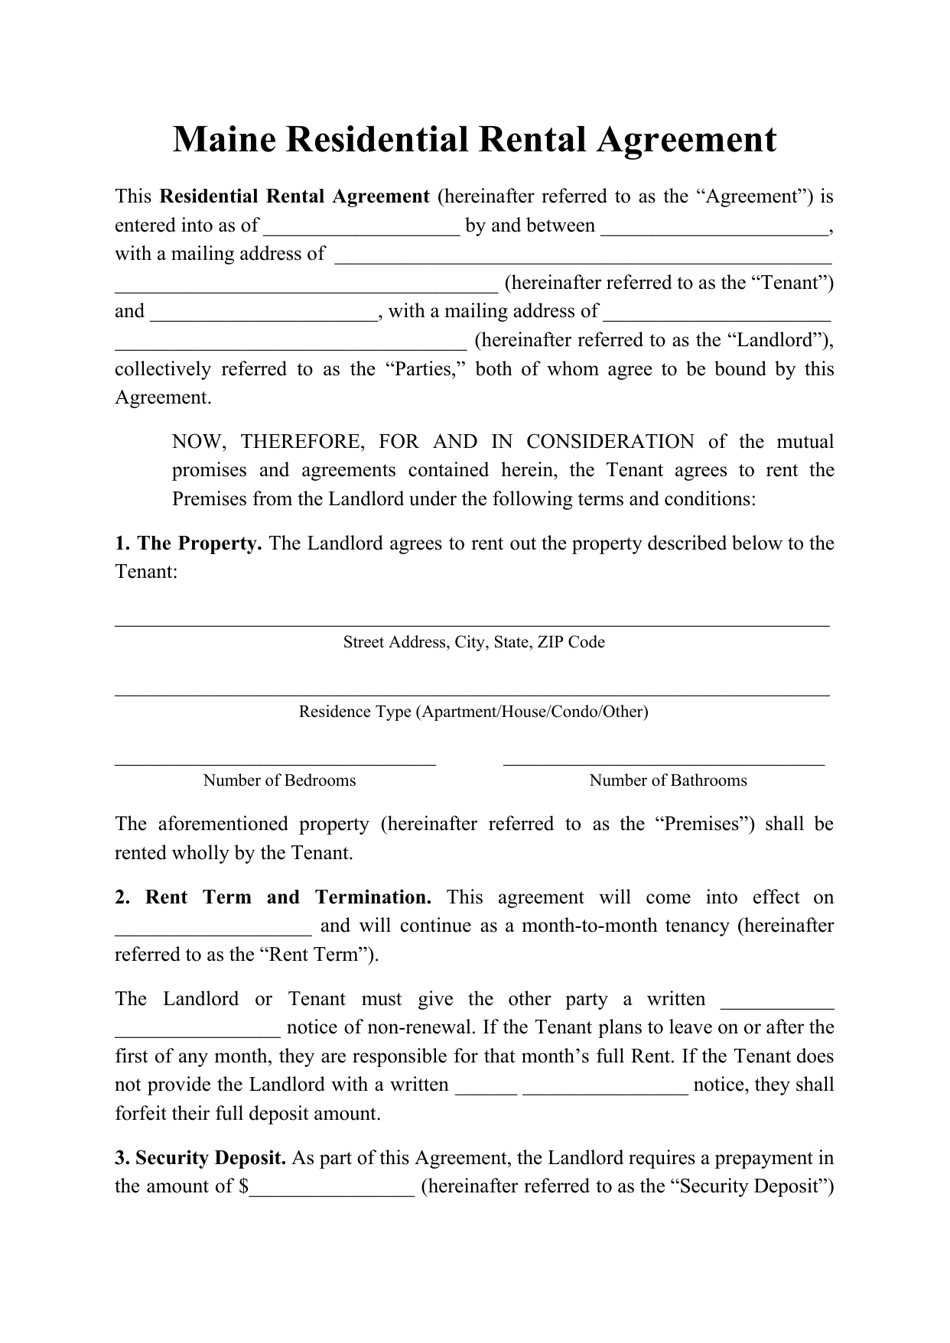 Residential Rental Agreement Template - Maine, Page 1